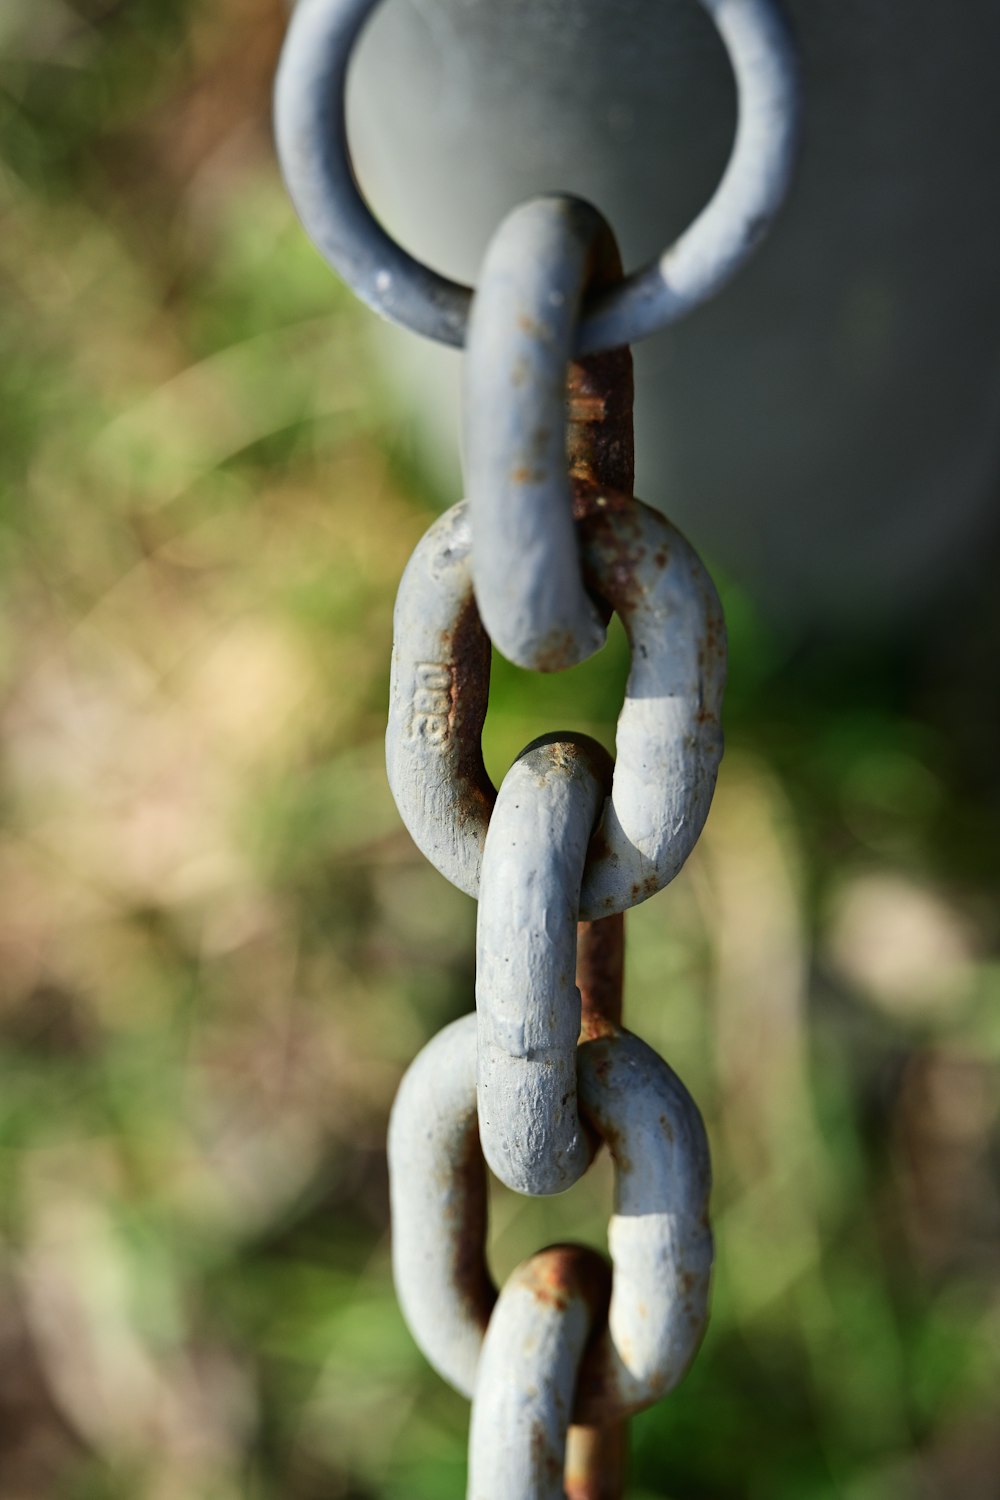 a close up of a chain hanging from a pole